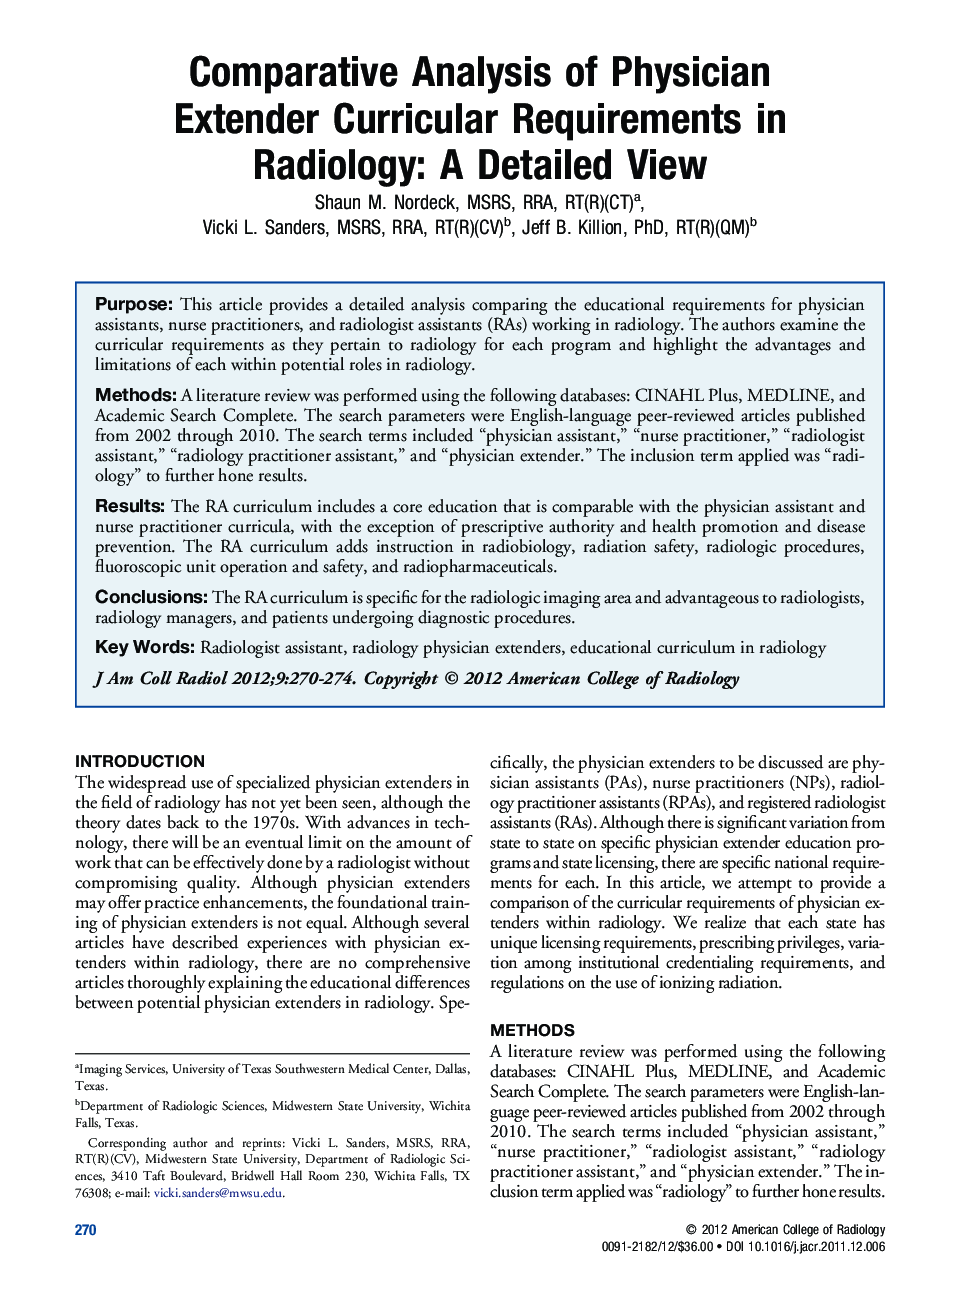 Comparative Analysis of Physician Extender Curricular Requirements in Radiology: A Detailed View